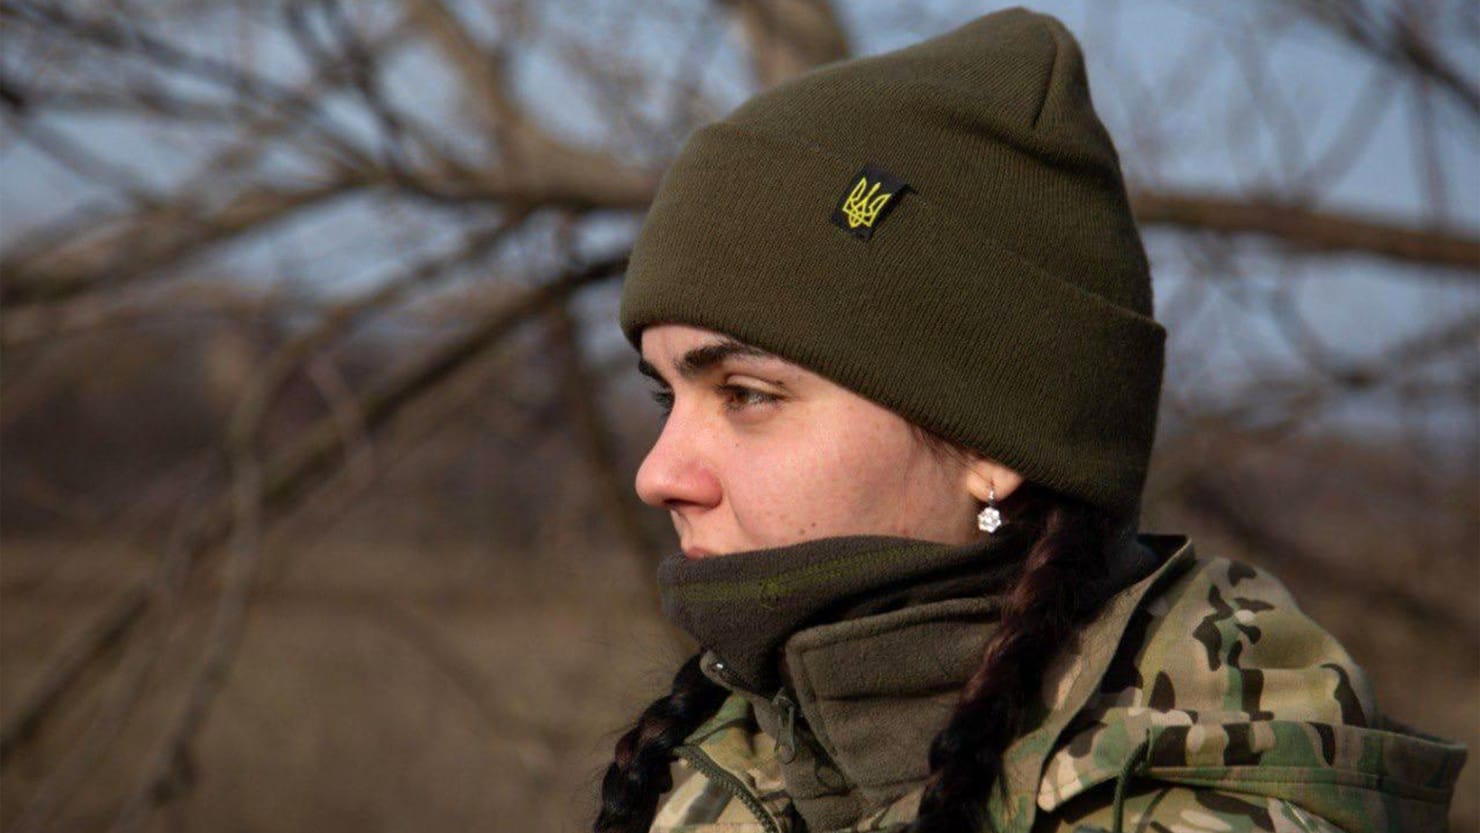 Female Ukrainian Soldiers Suffer Lack of Women's Resources: Report